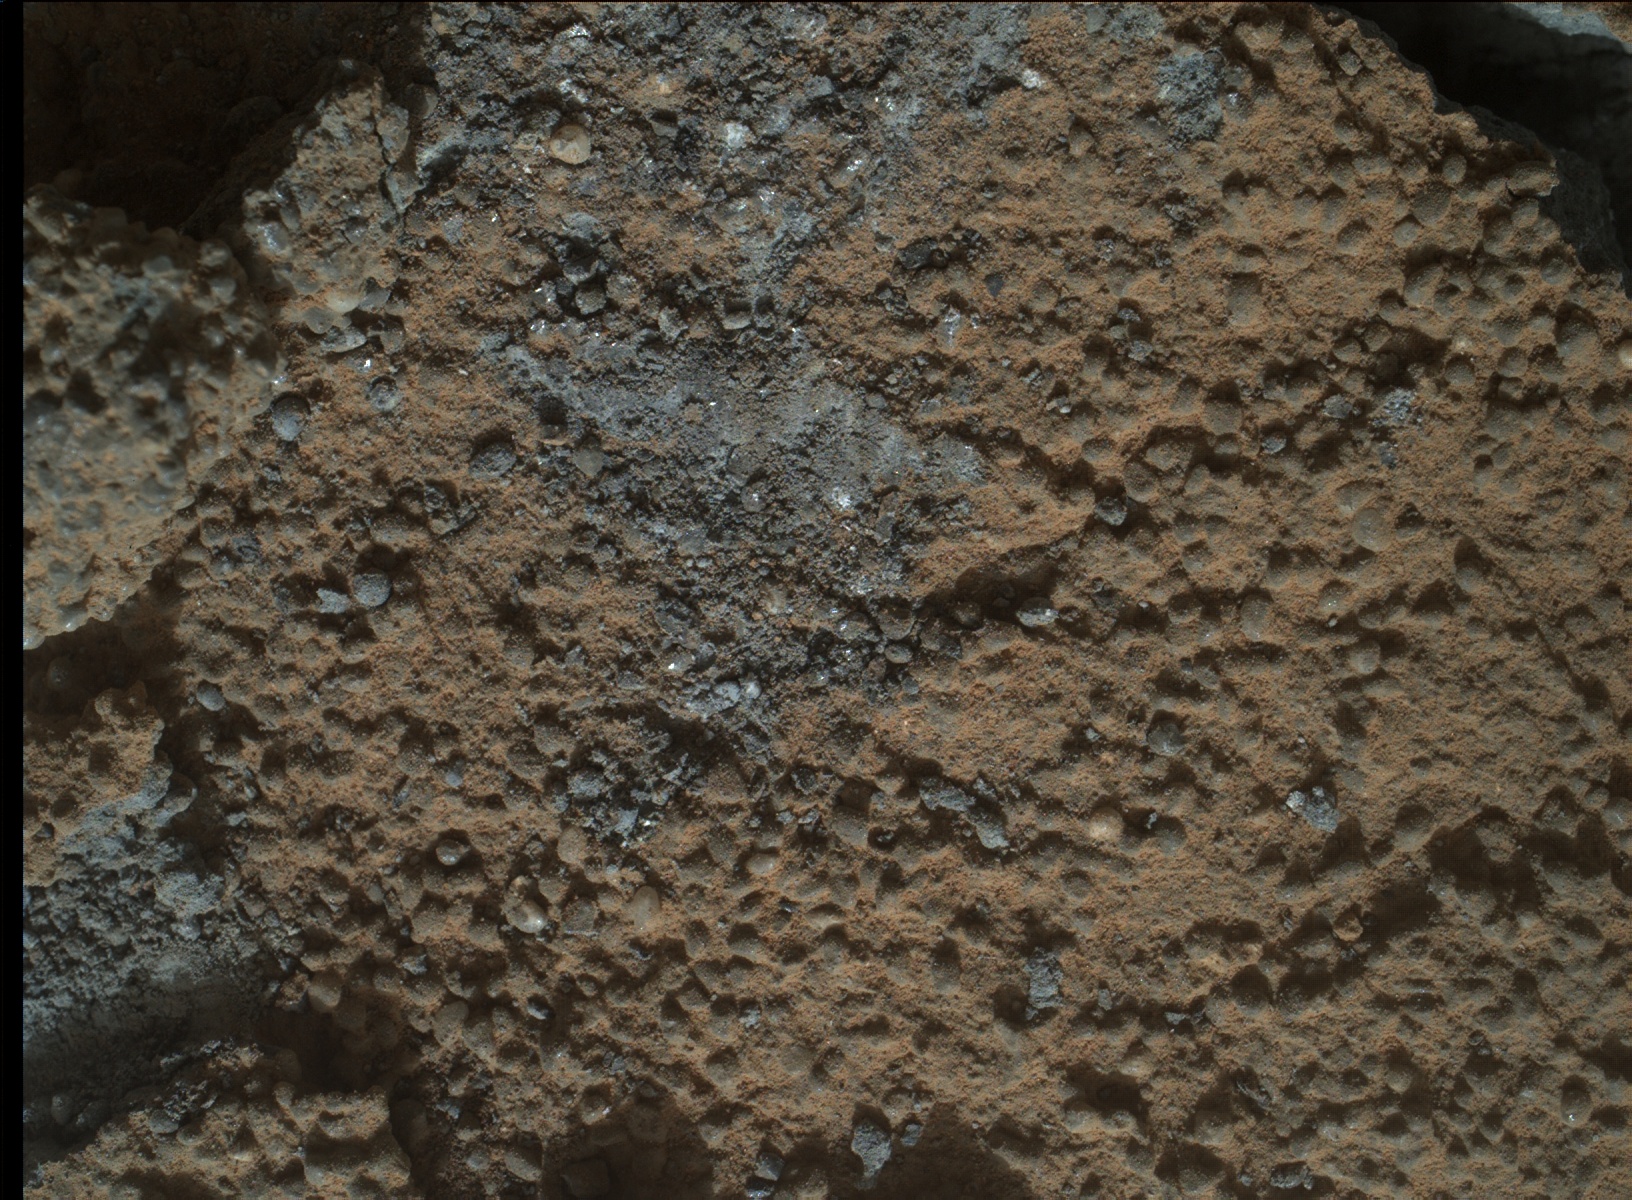 Nasa's Mars rover Curiosity acquired this image using its Mars Hand Lens Imager (MAHLI) on Sol 1325